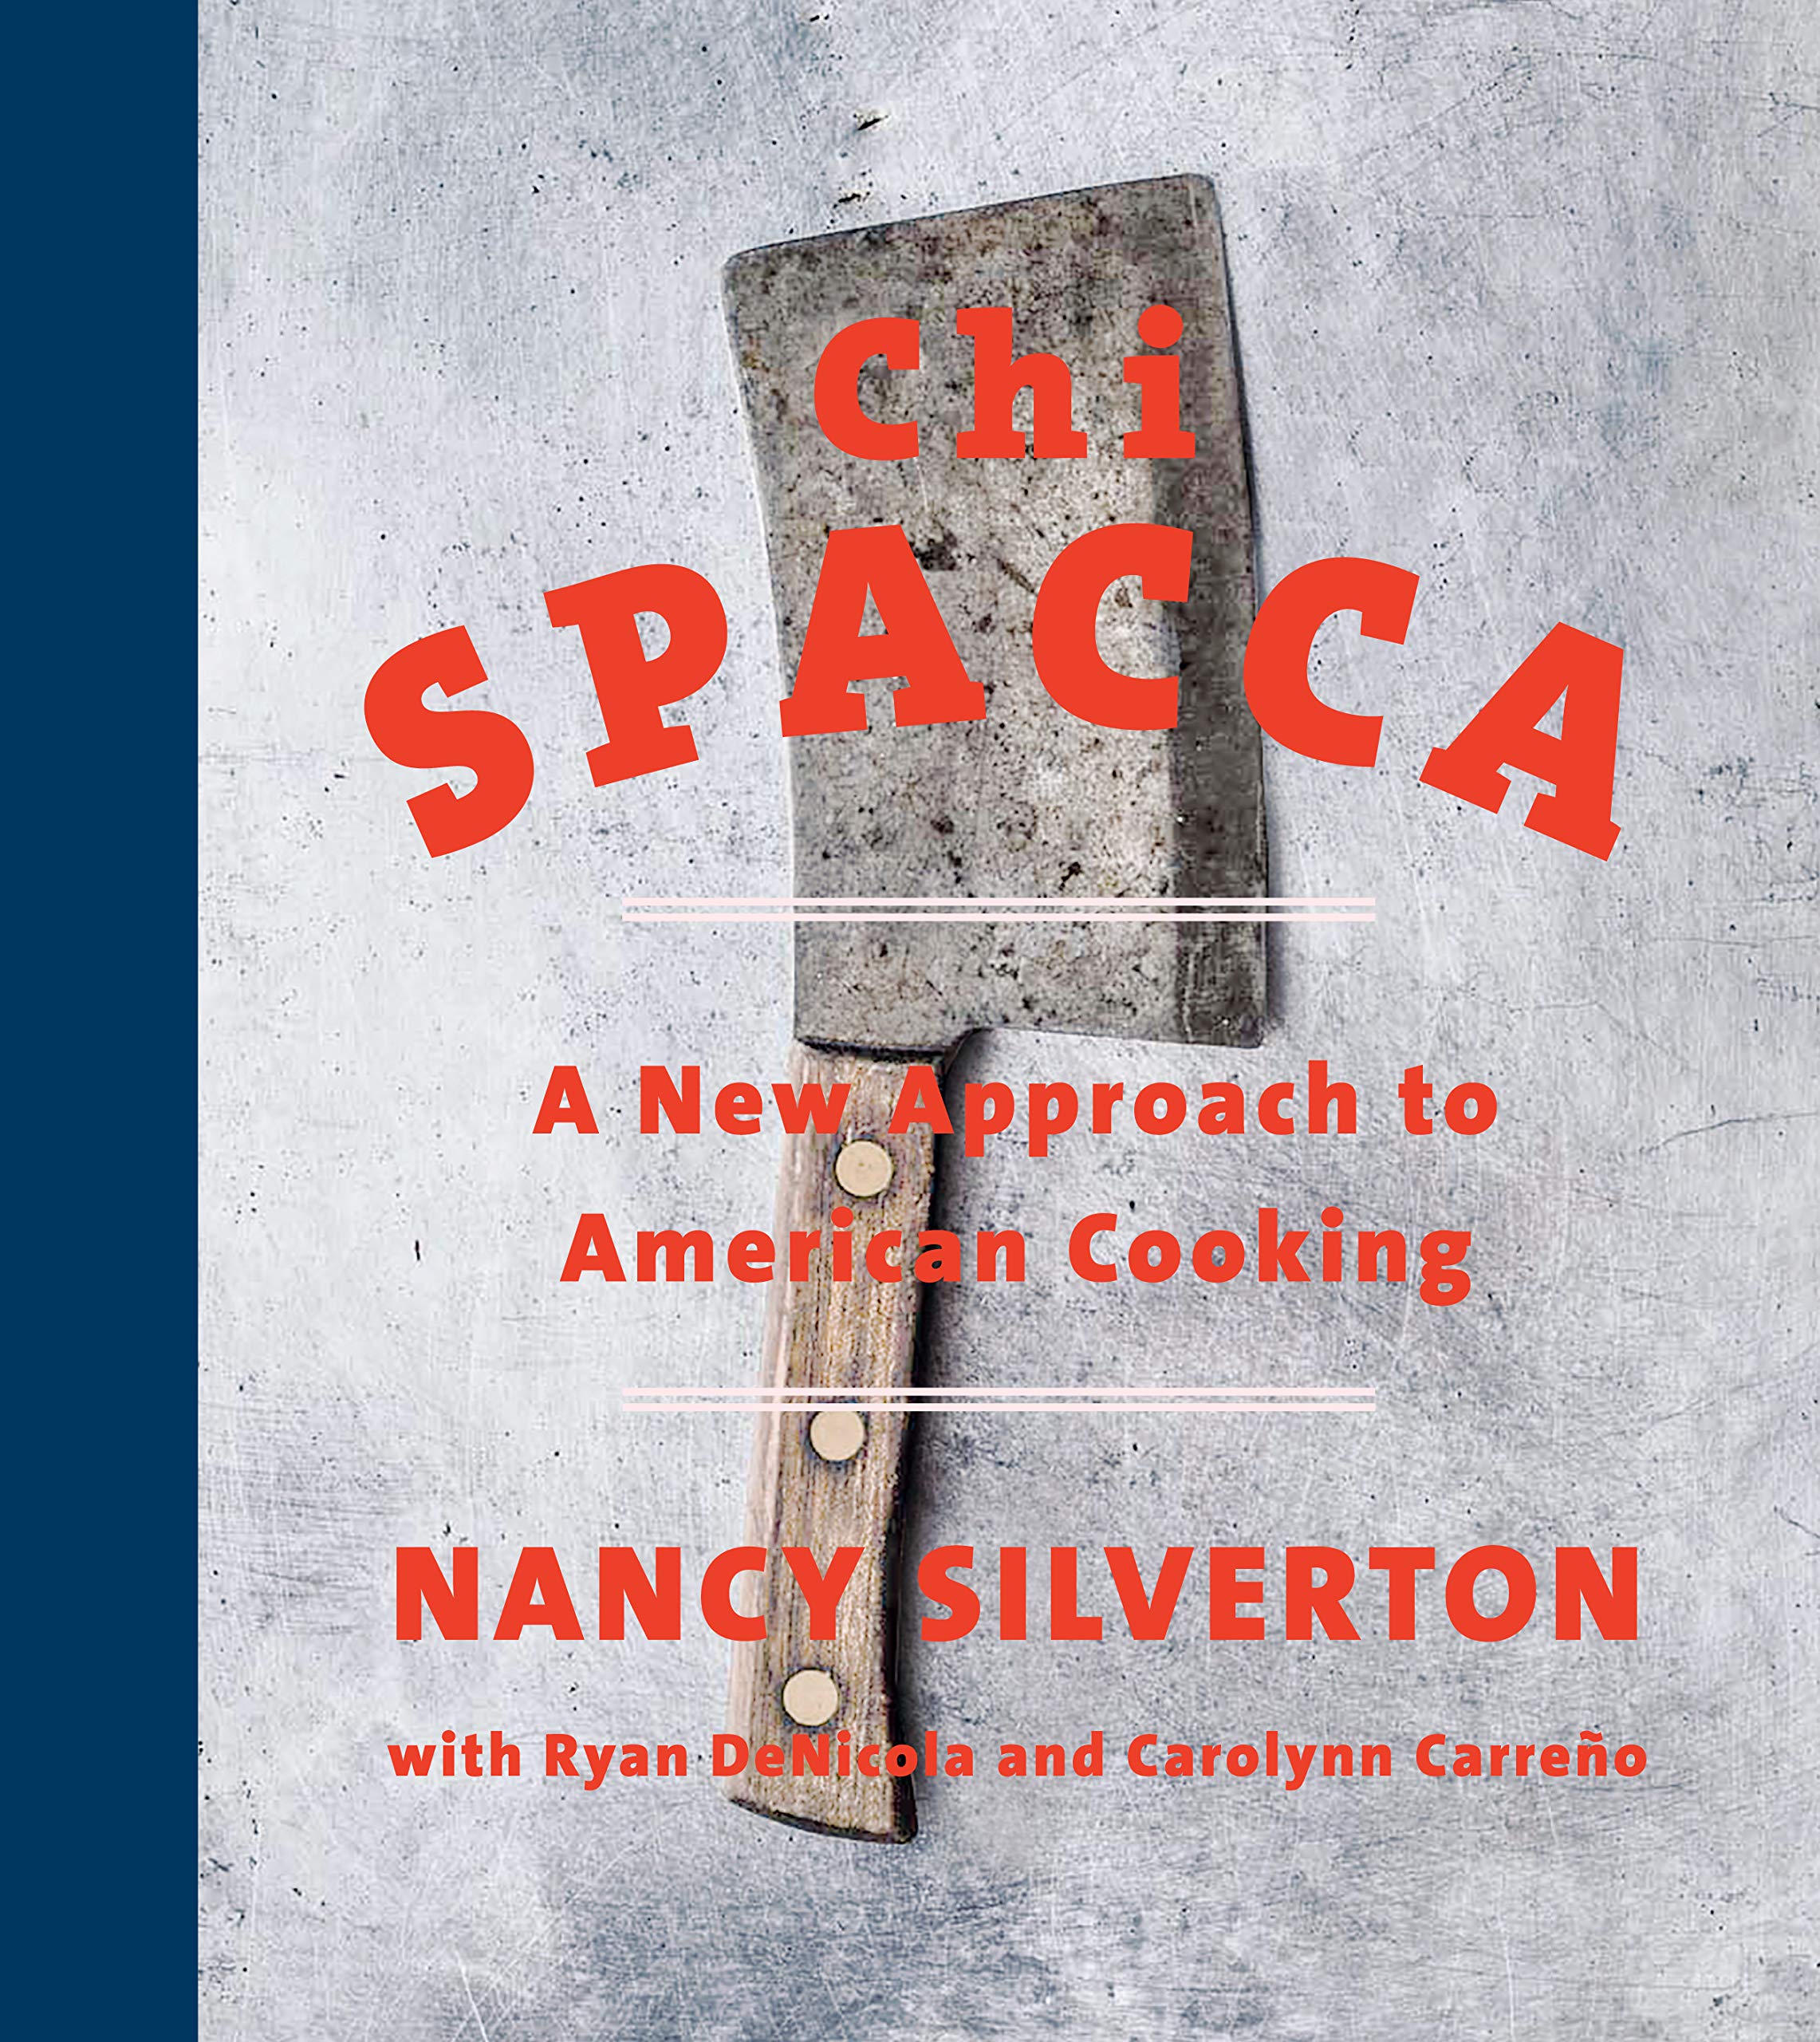 Chi Spacca: A New Approach to American Cooking (Nancy Silverton)